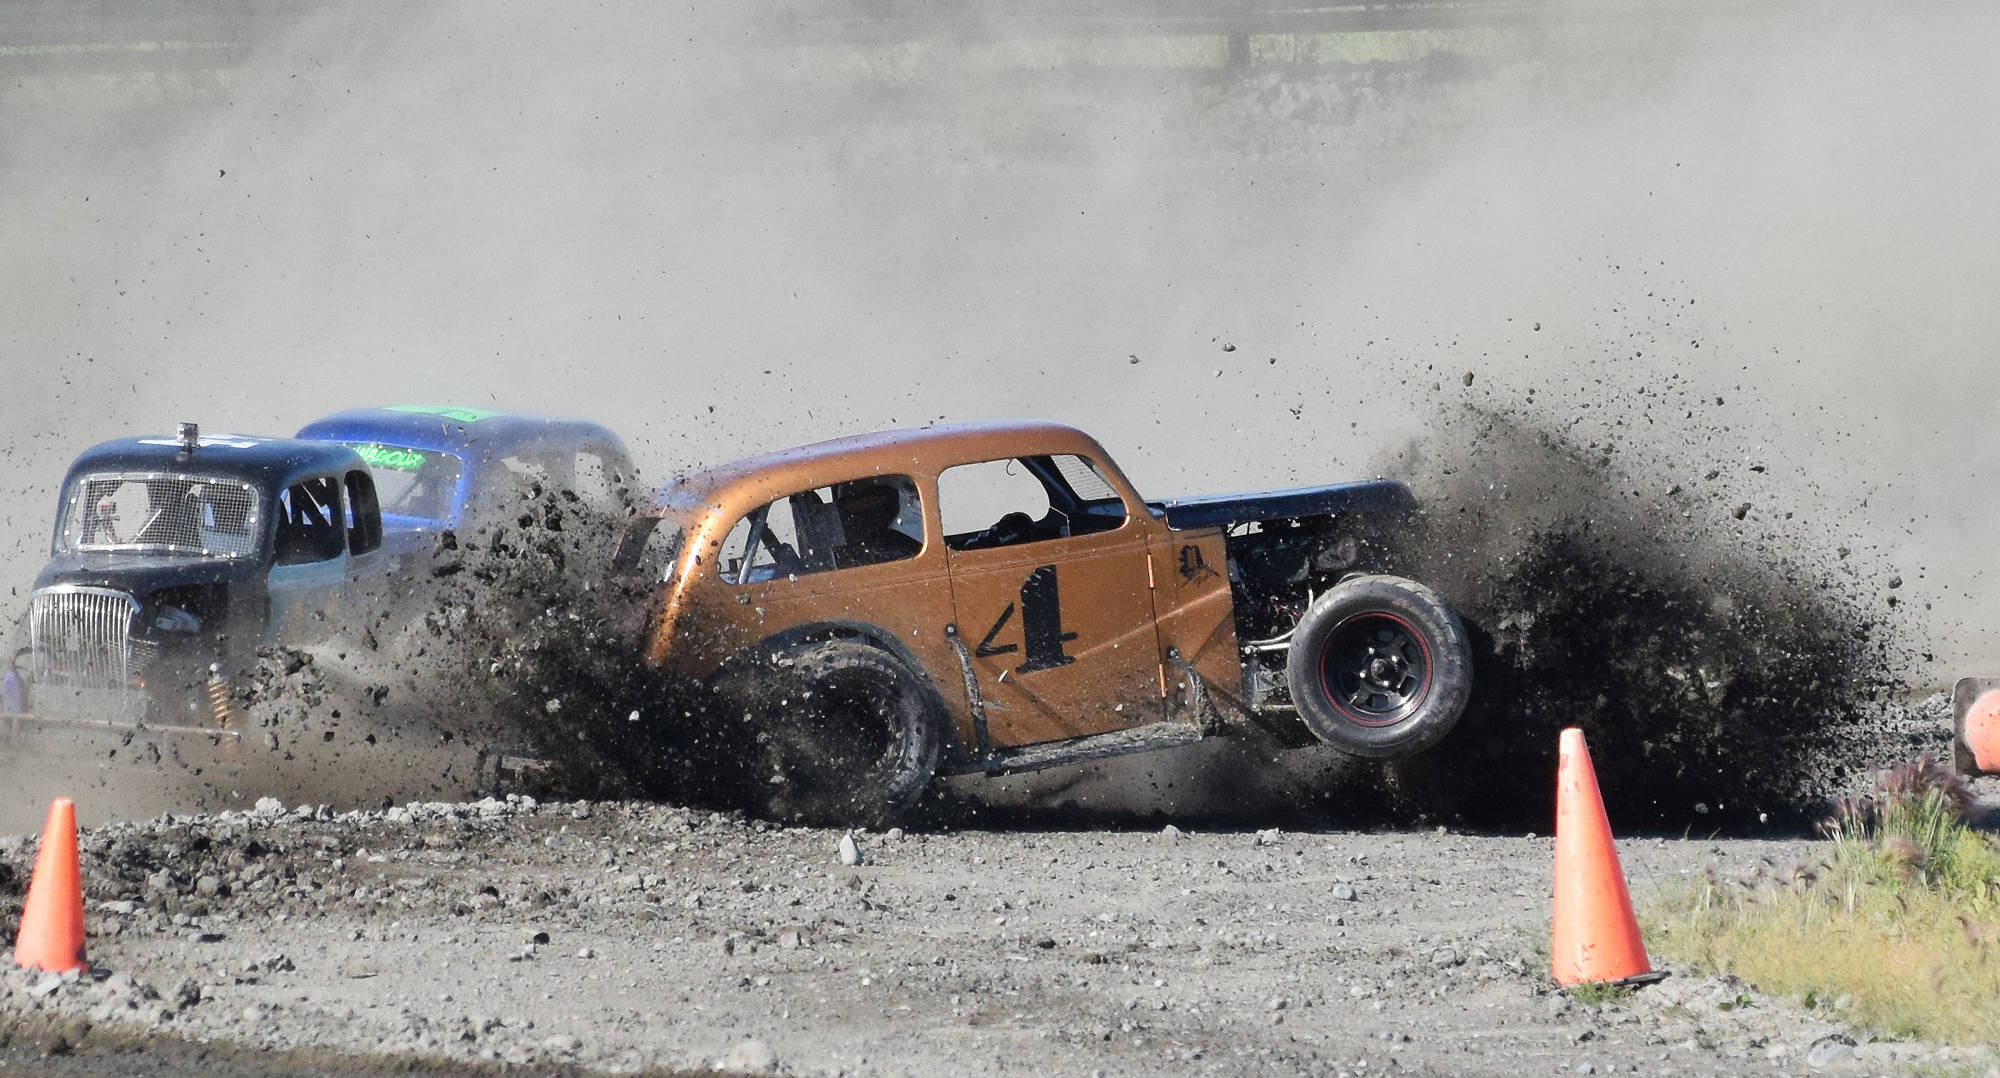 Dallas Dalton spins out during the running of the Alaska Dirt Track Shootout held July 22, 2017, at Twin City Raceway in Kenai. (Photo by Joey Klecka/Peninsula Clarion)